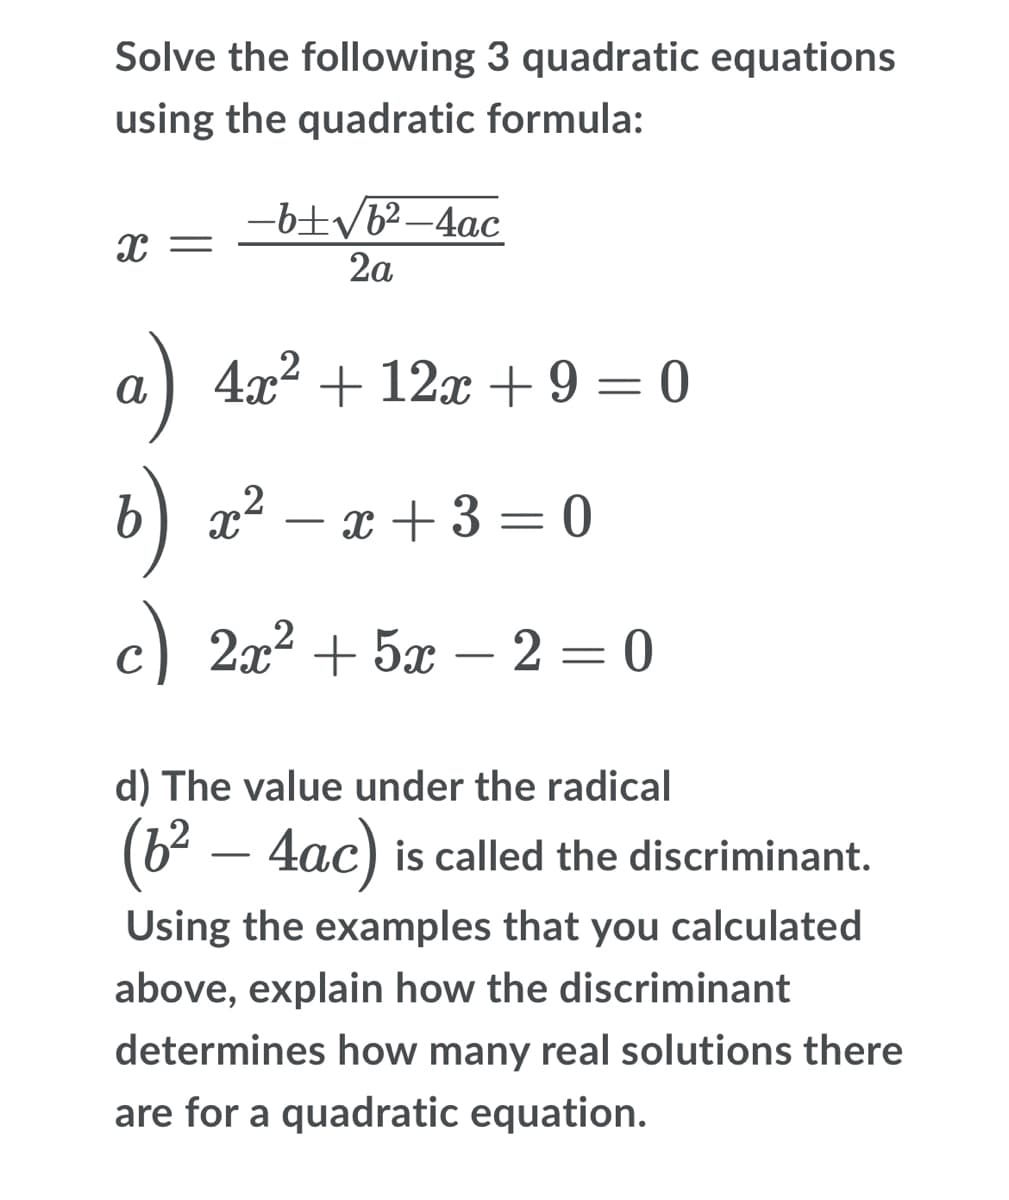 Solve the following 3 quadratic equations
using the quadratic formula:
-b±yb²–4ac
2a
a) 4x2 + 12x + 9 = 0
b) x² – x + 3 = 0
-
c) 2x2 + 5x – 2 = 0
C
d) The value under the radical
(6² – 4ac) is called the discriminant.
Using the examples that you calculated
above, explain how the discriminant
determines how many real solutions there
are for a quadratic equation.
